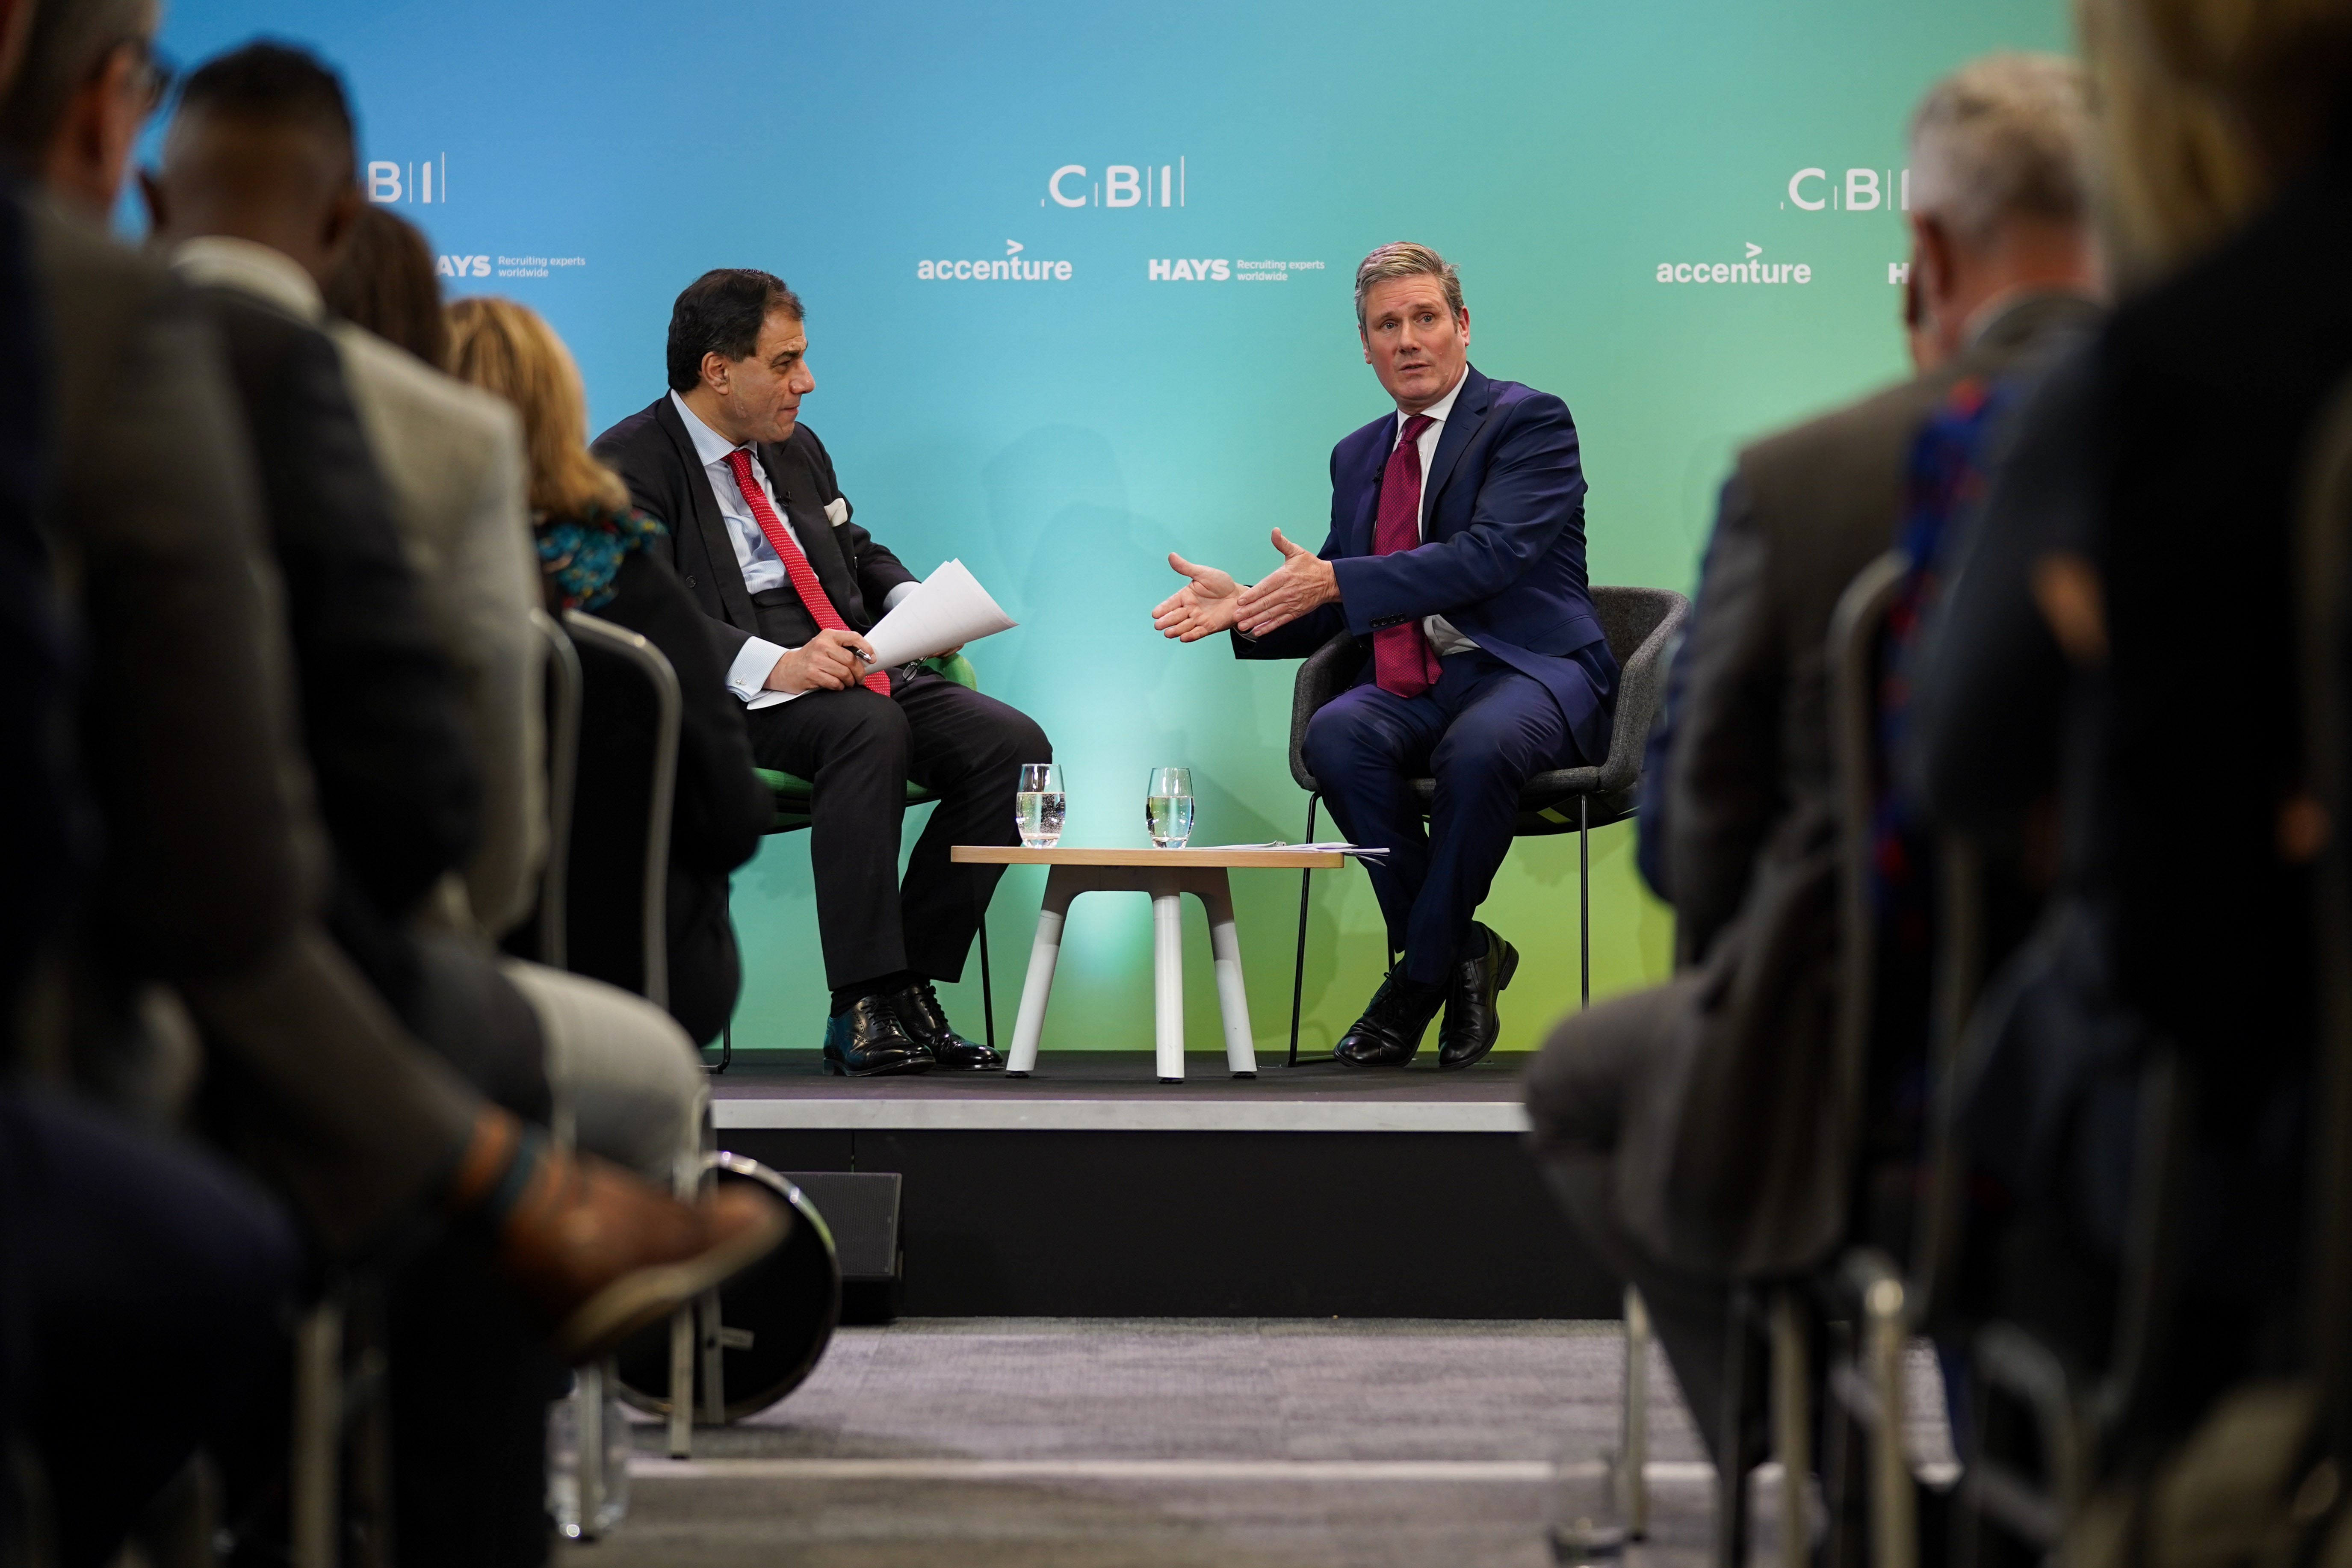 Labour leader Sir Keir Starmer takes part in a question and answer session with CBI president Lord Bilimoria (Jacob King/PA)